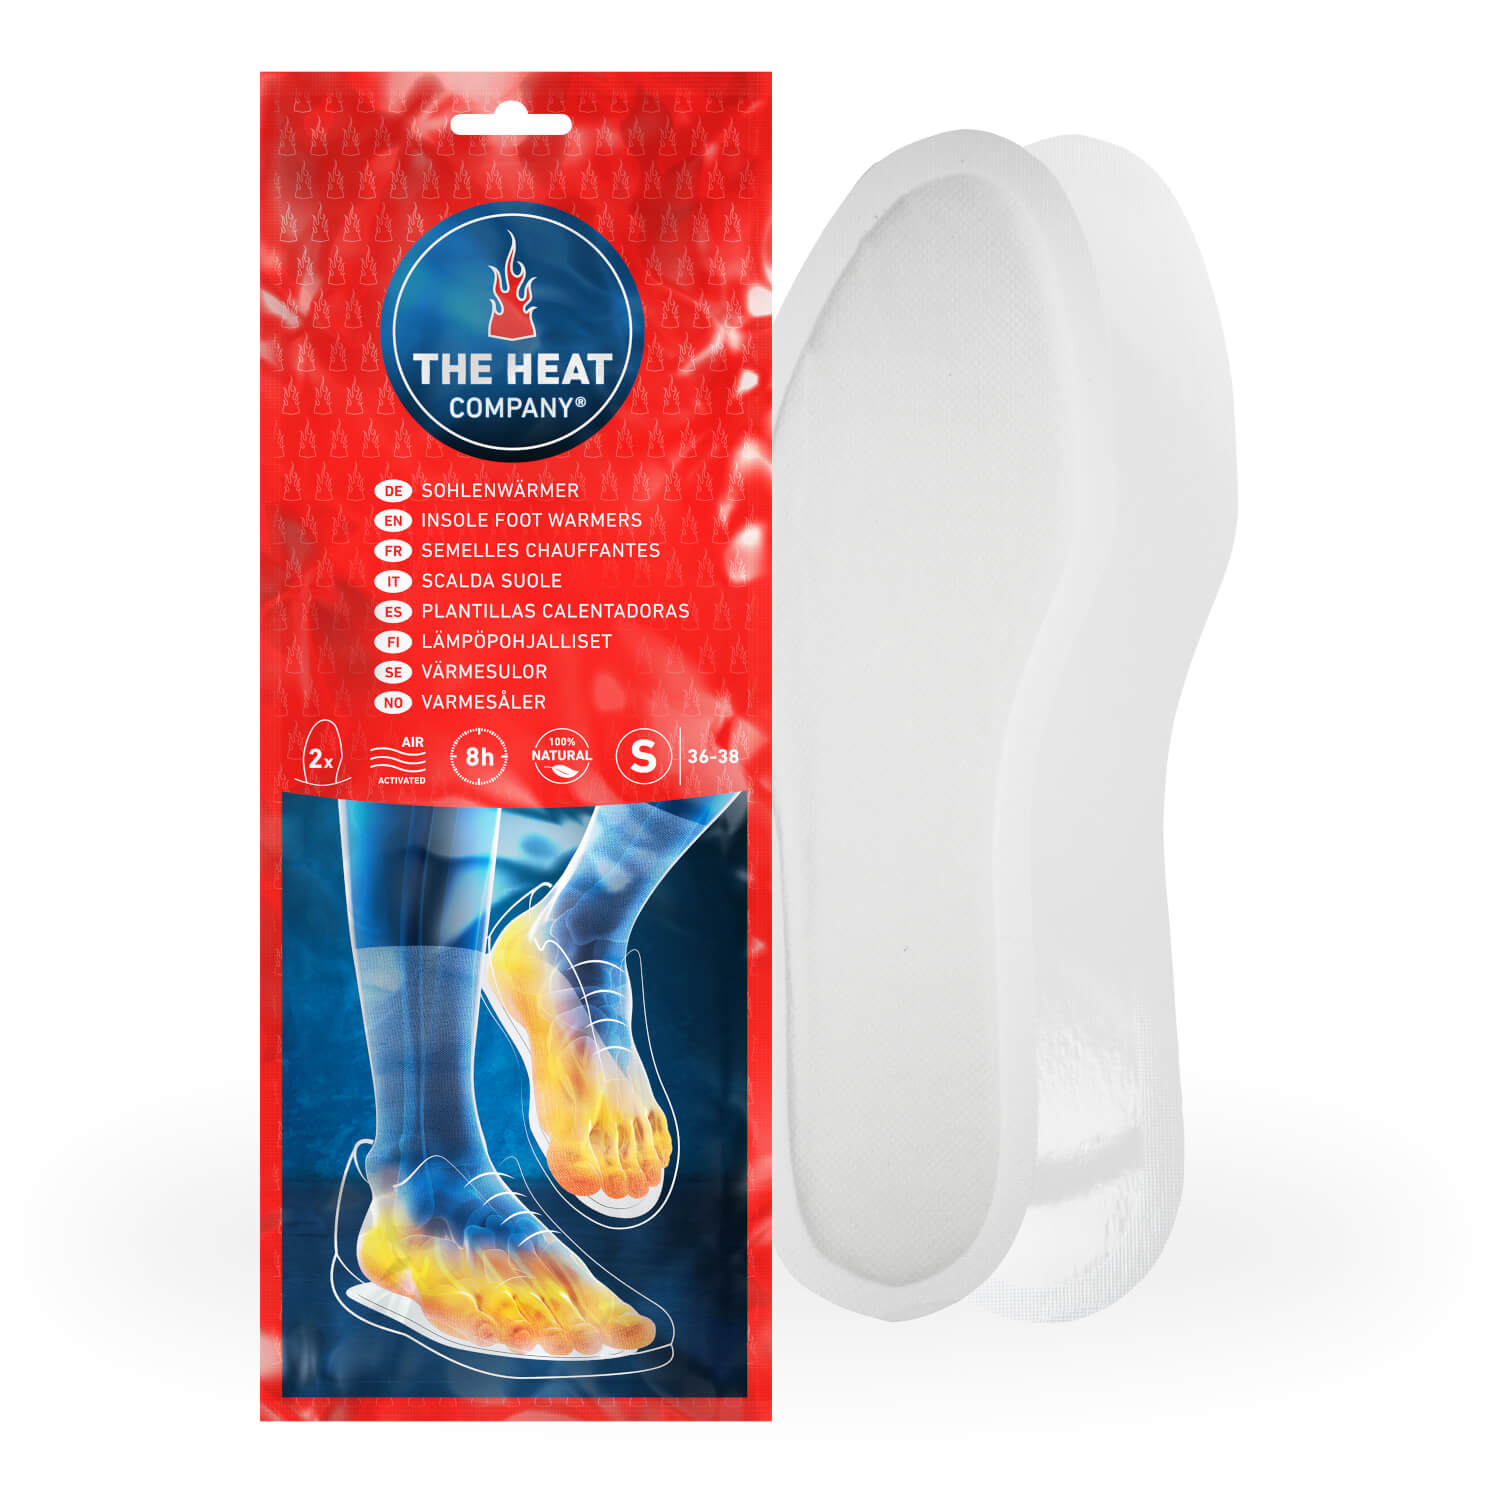 THE HEAT COMPANY Insole Foot Warmers30 PairsEXTRA WARM8 Hours of Warmth 